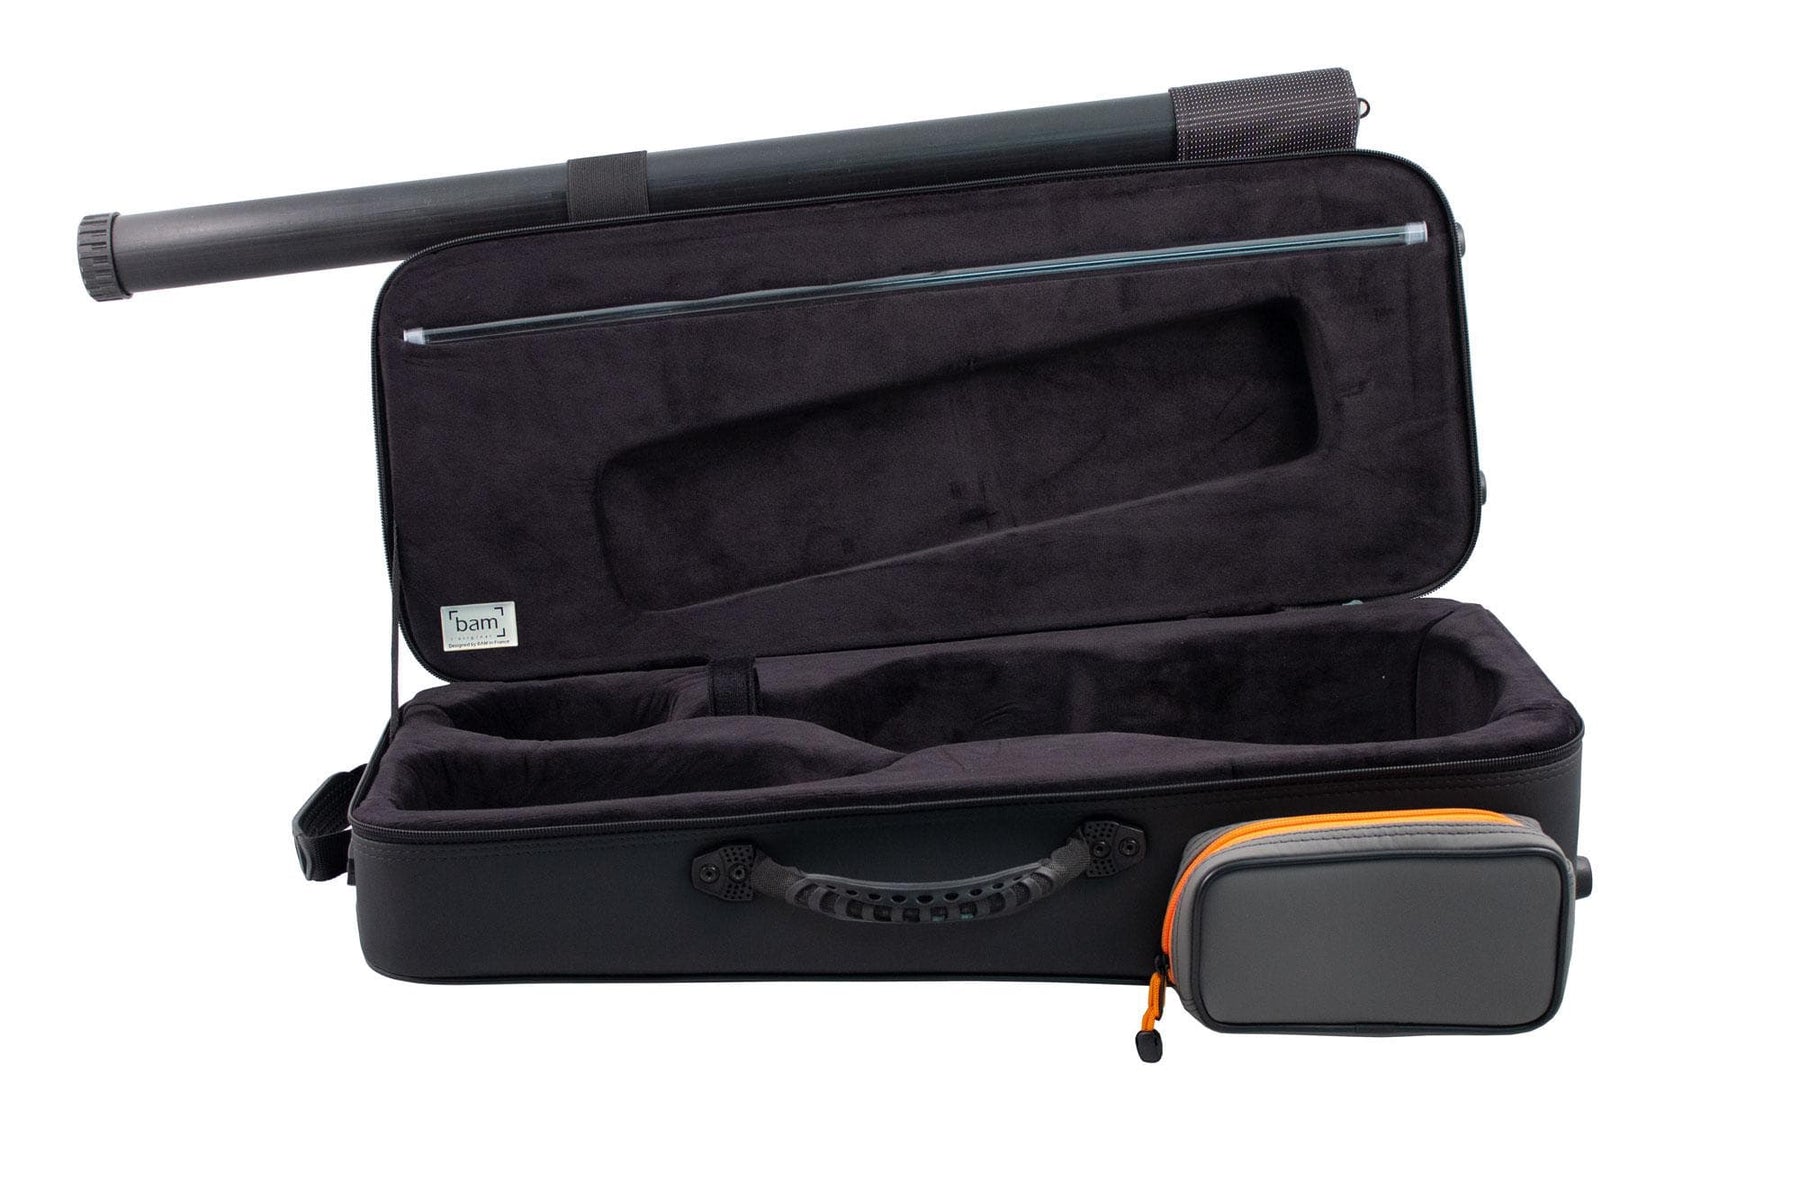 BAM Peak Performance Compact Violin Case with Bow Tube